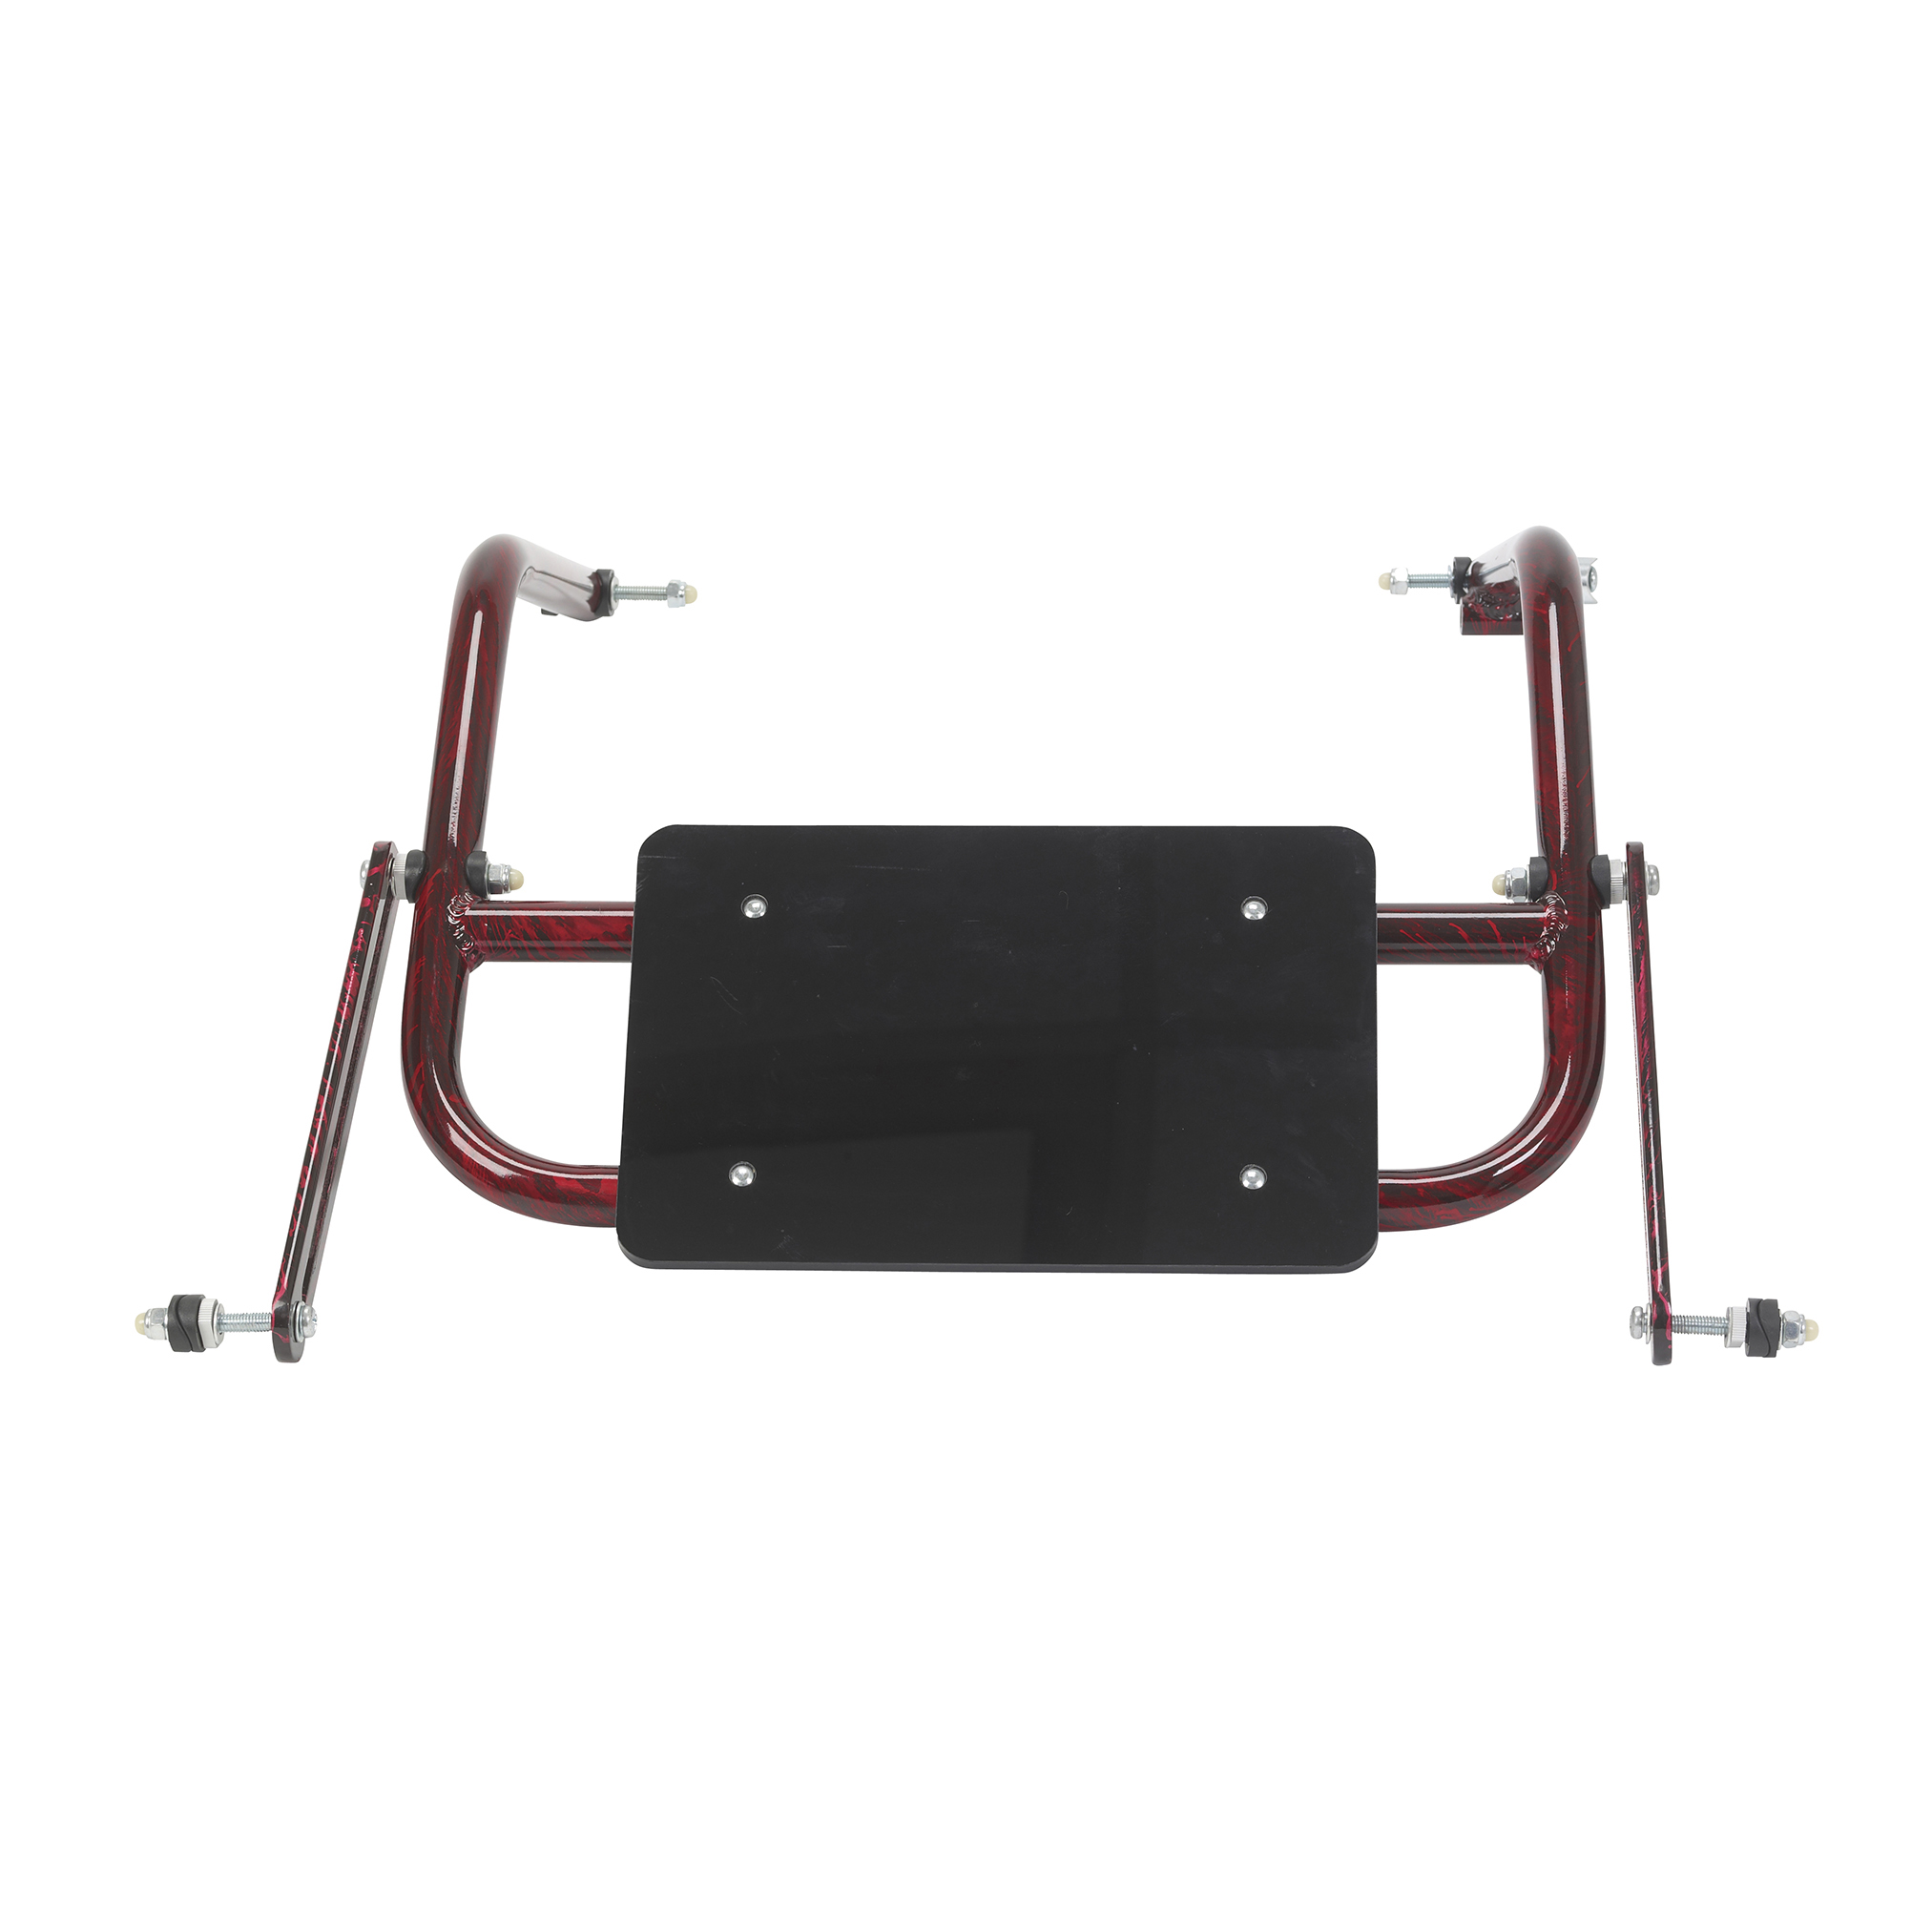 Nimbo Seat for Lightweight Gait Trainer, For use with Wenzelite Model KA 1200N - image 3 of 3